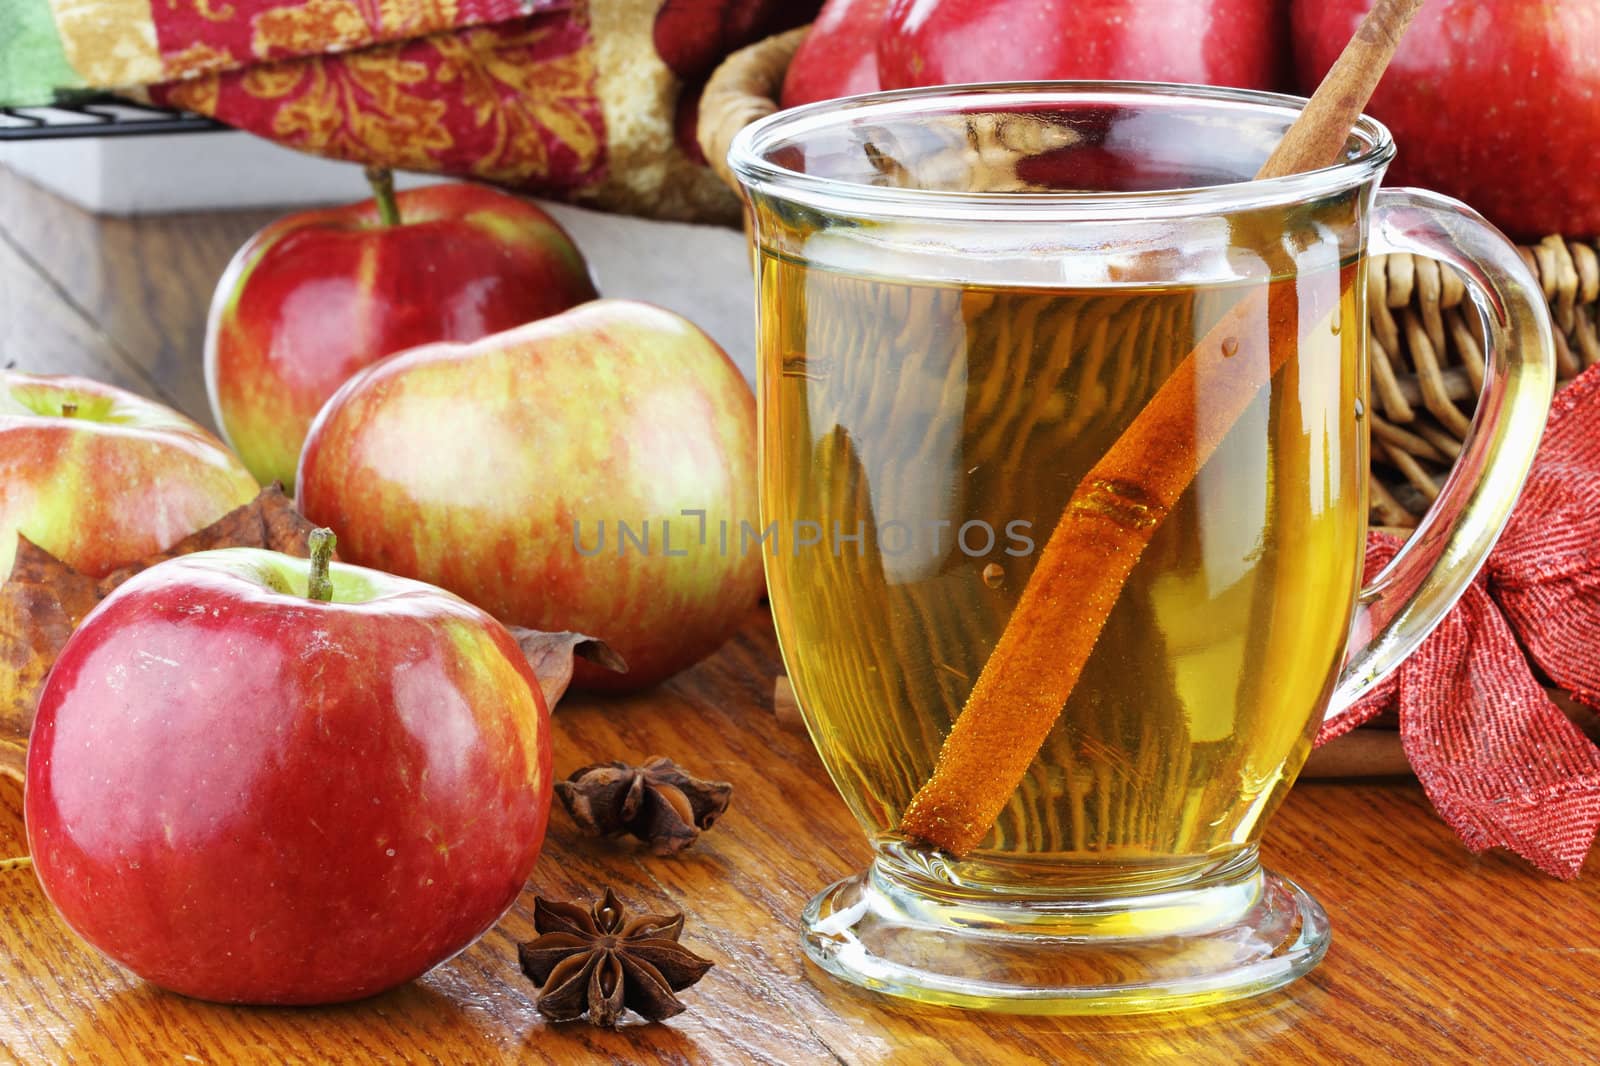 Apple Juice with cinnamon bark, anise stars and fresh apples. Shallow depth of field with selective focus on juice. Reflection can be seen in table.
